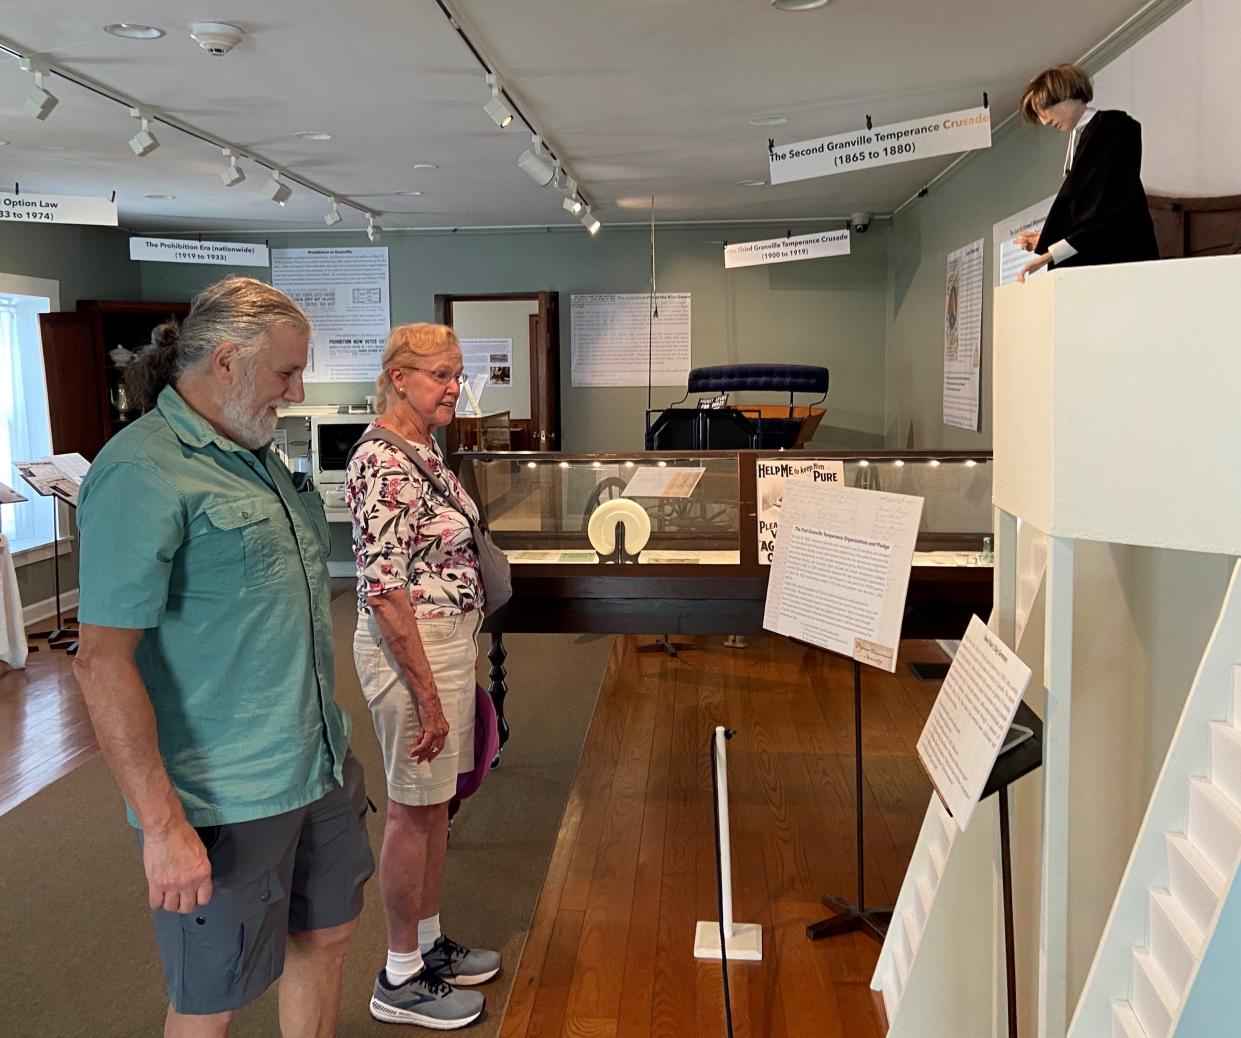 Jon Leuzio and Pat Mahieu read about the Temperance movement in Granville during the nineteenth century at the Granville Historical Museum. The figure at top right is the Rev. Jacob Little, a leader in the drive to halt the sale of liquor in the village.